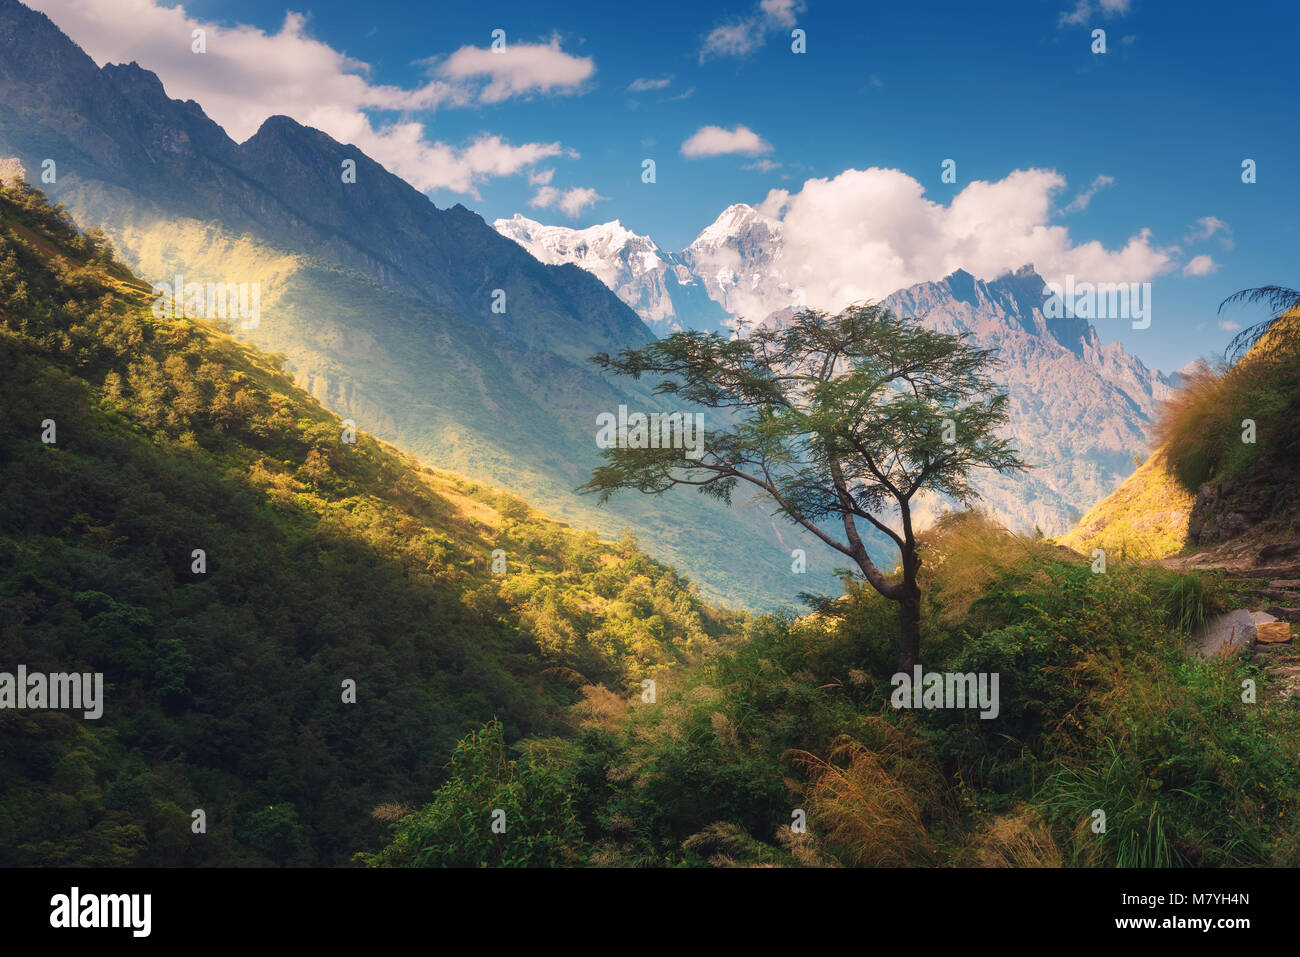 Beautiful alone tree against amazing Himalayan mountains with snow-covered peaks, forest with green trees, blue sky with clouds in Nepal at sunset. La Stock Photo